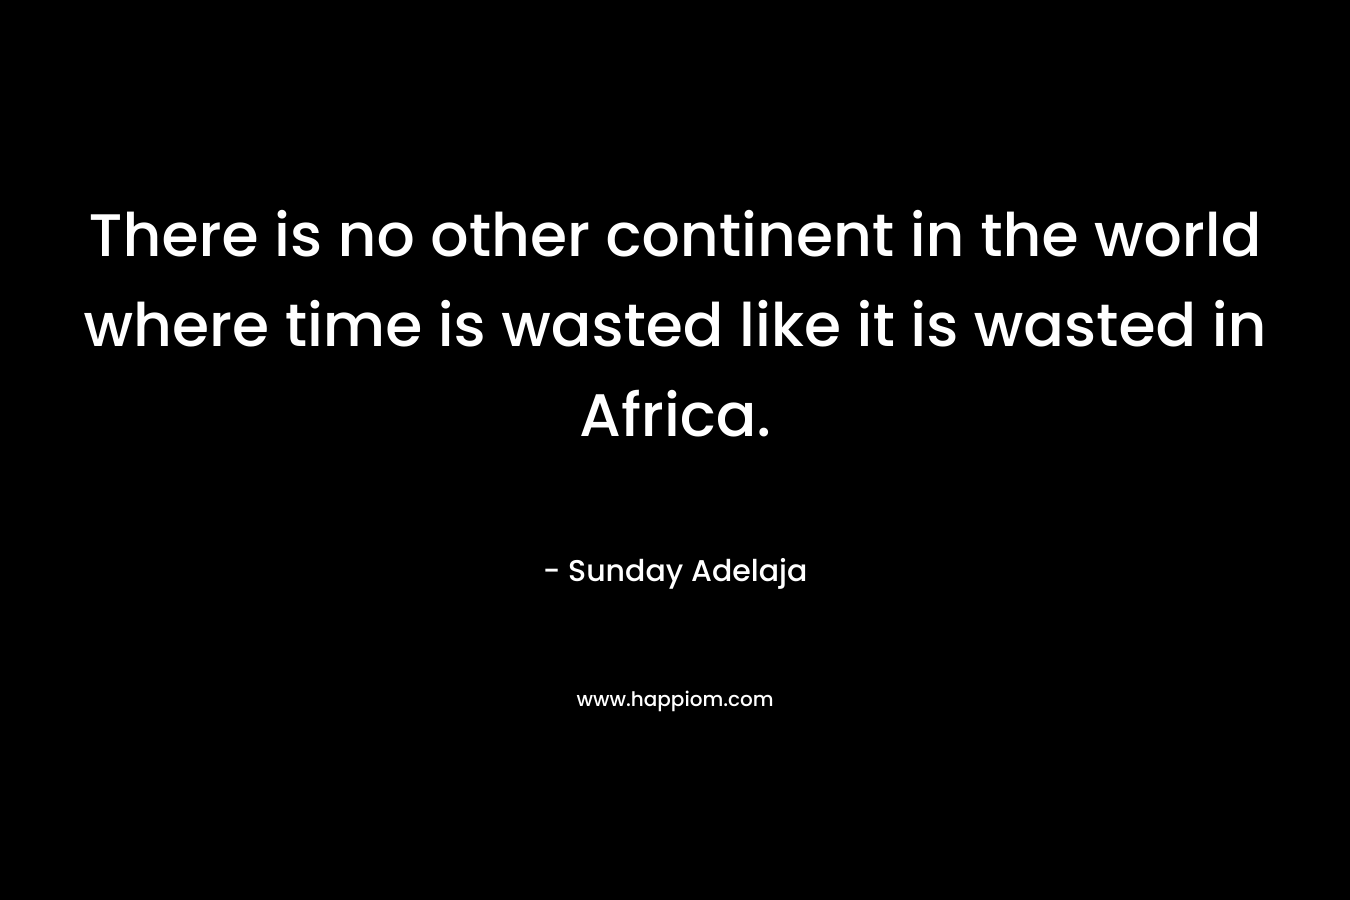 There is no other continent in the world where time is wasted like it is wasted in Africa.